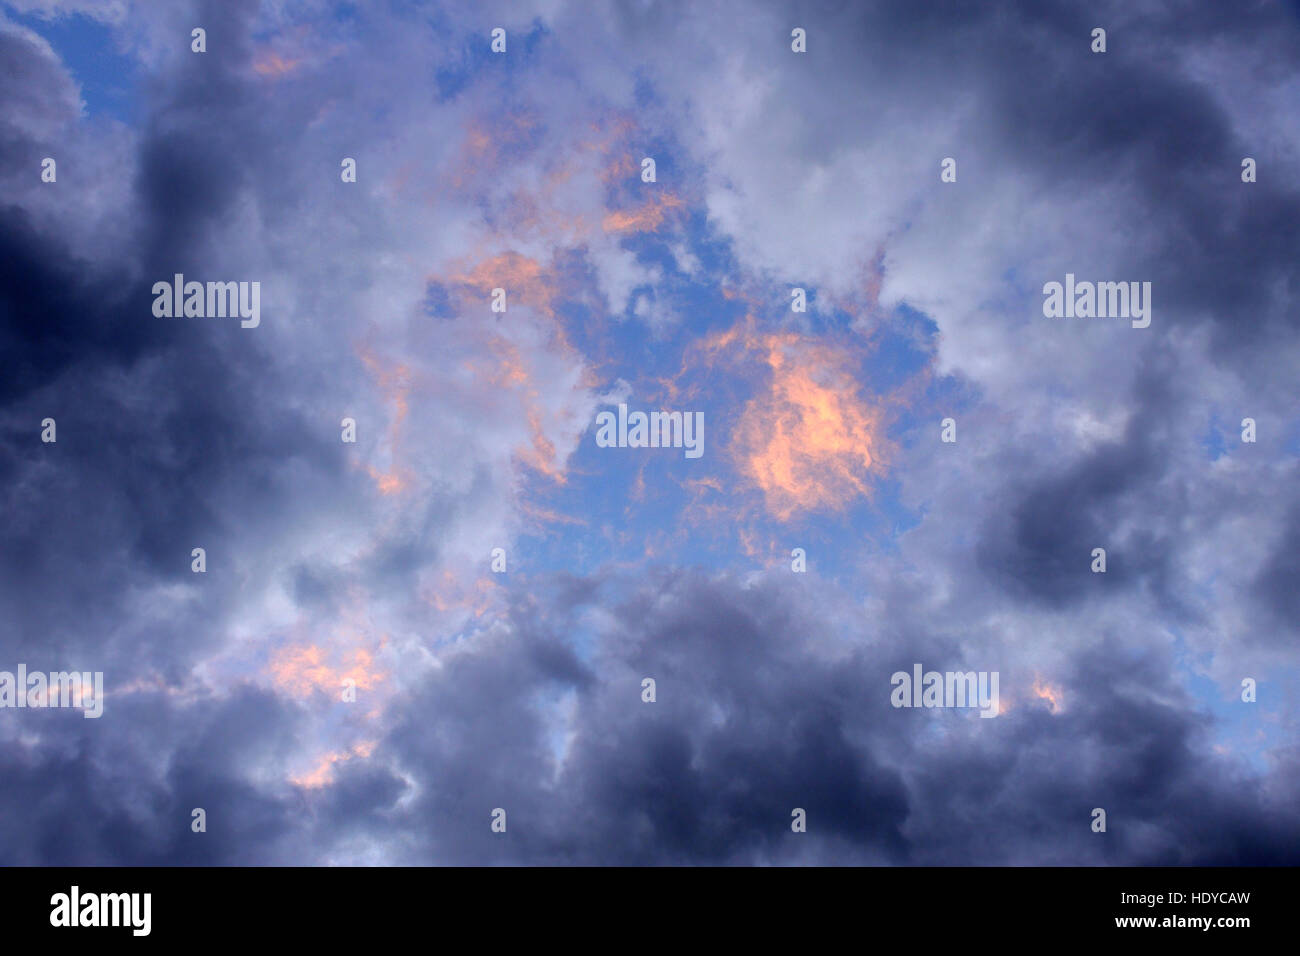 Stormy cloud at sunset background image Stock Photo